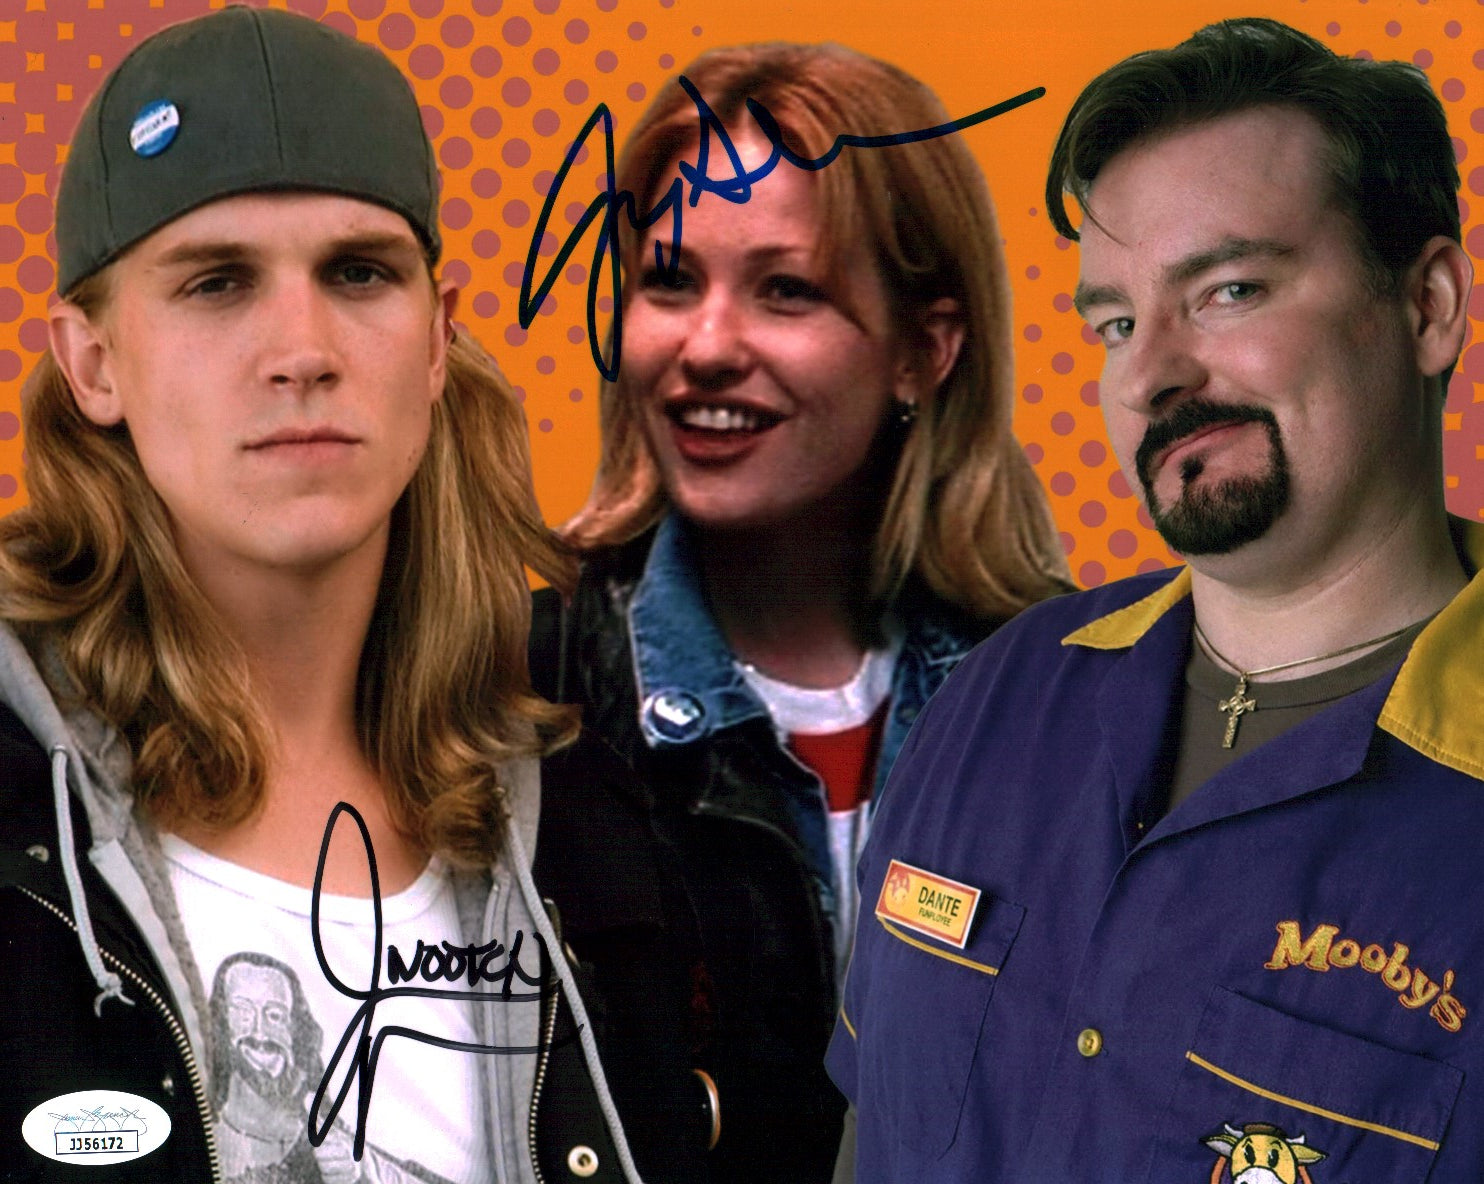 Clerks III 8x10 Signed Photo Cast x2 Adams, Mewes JSA Certified Autograph